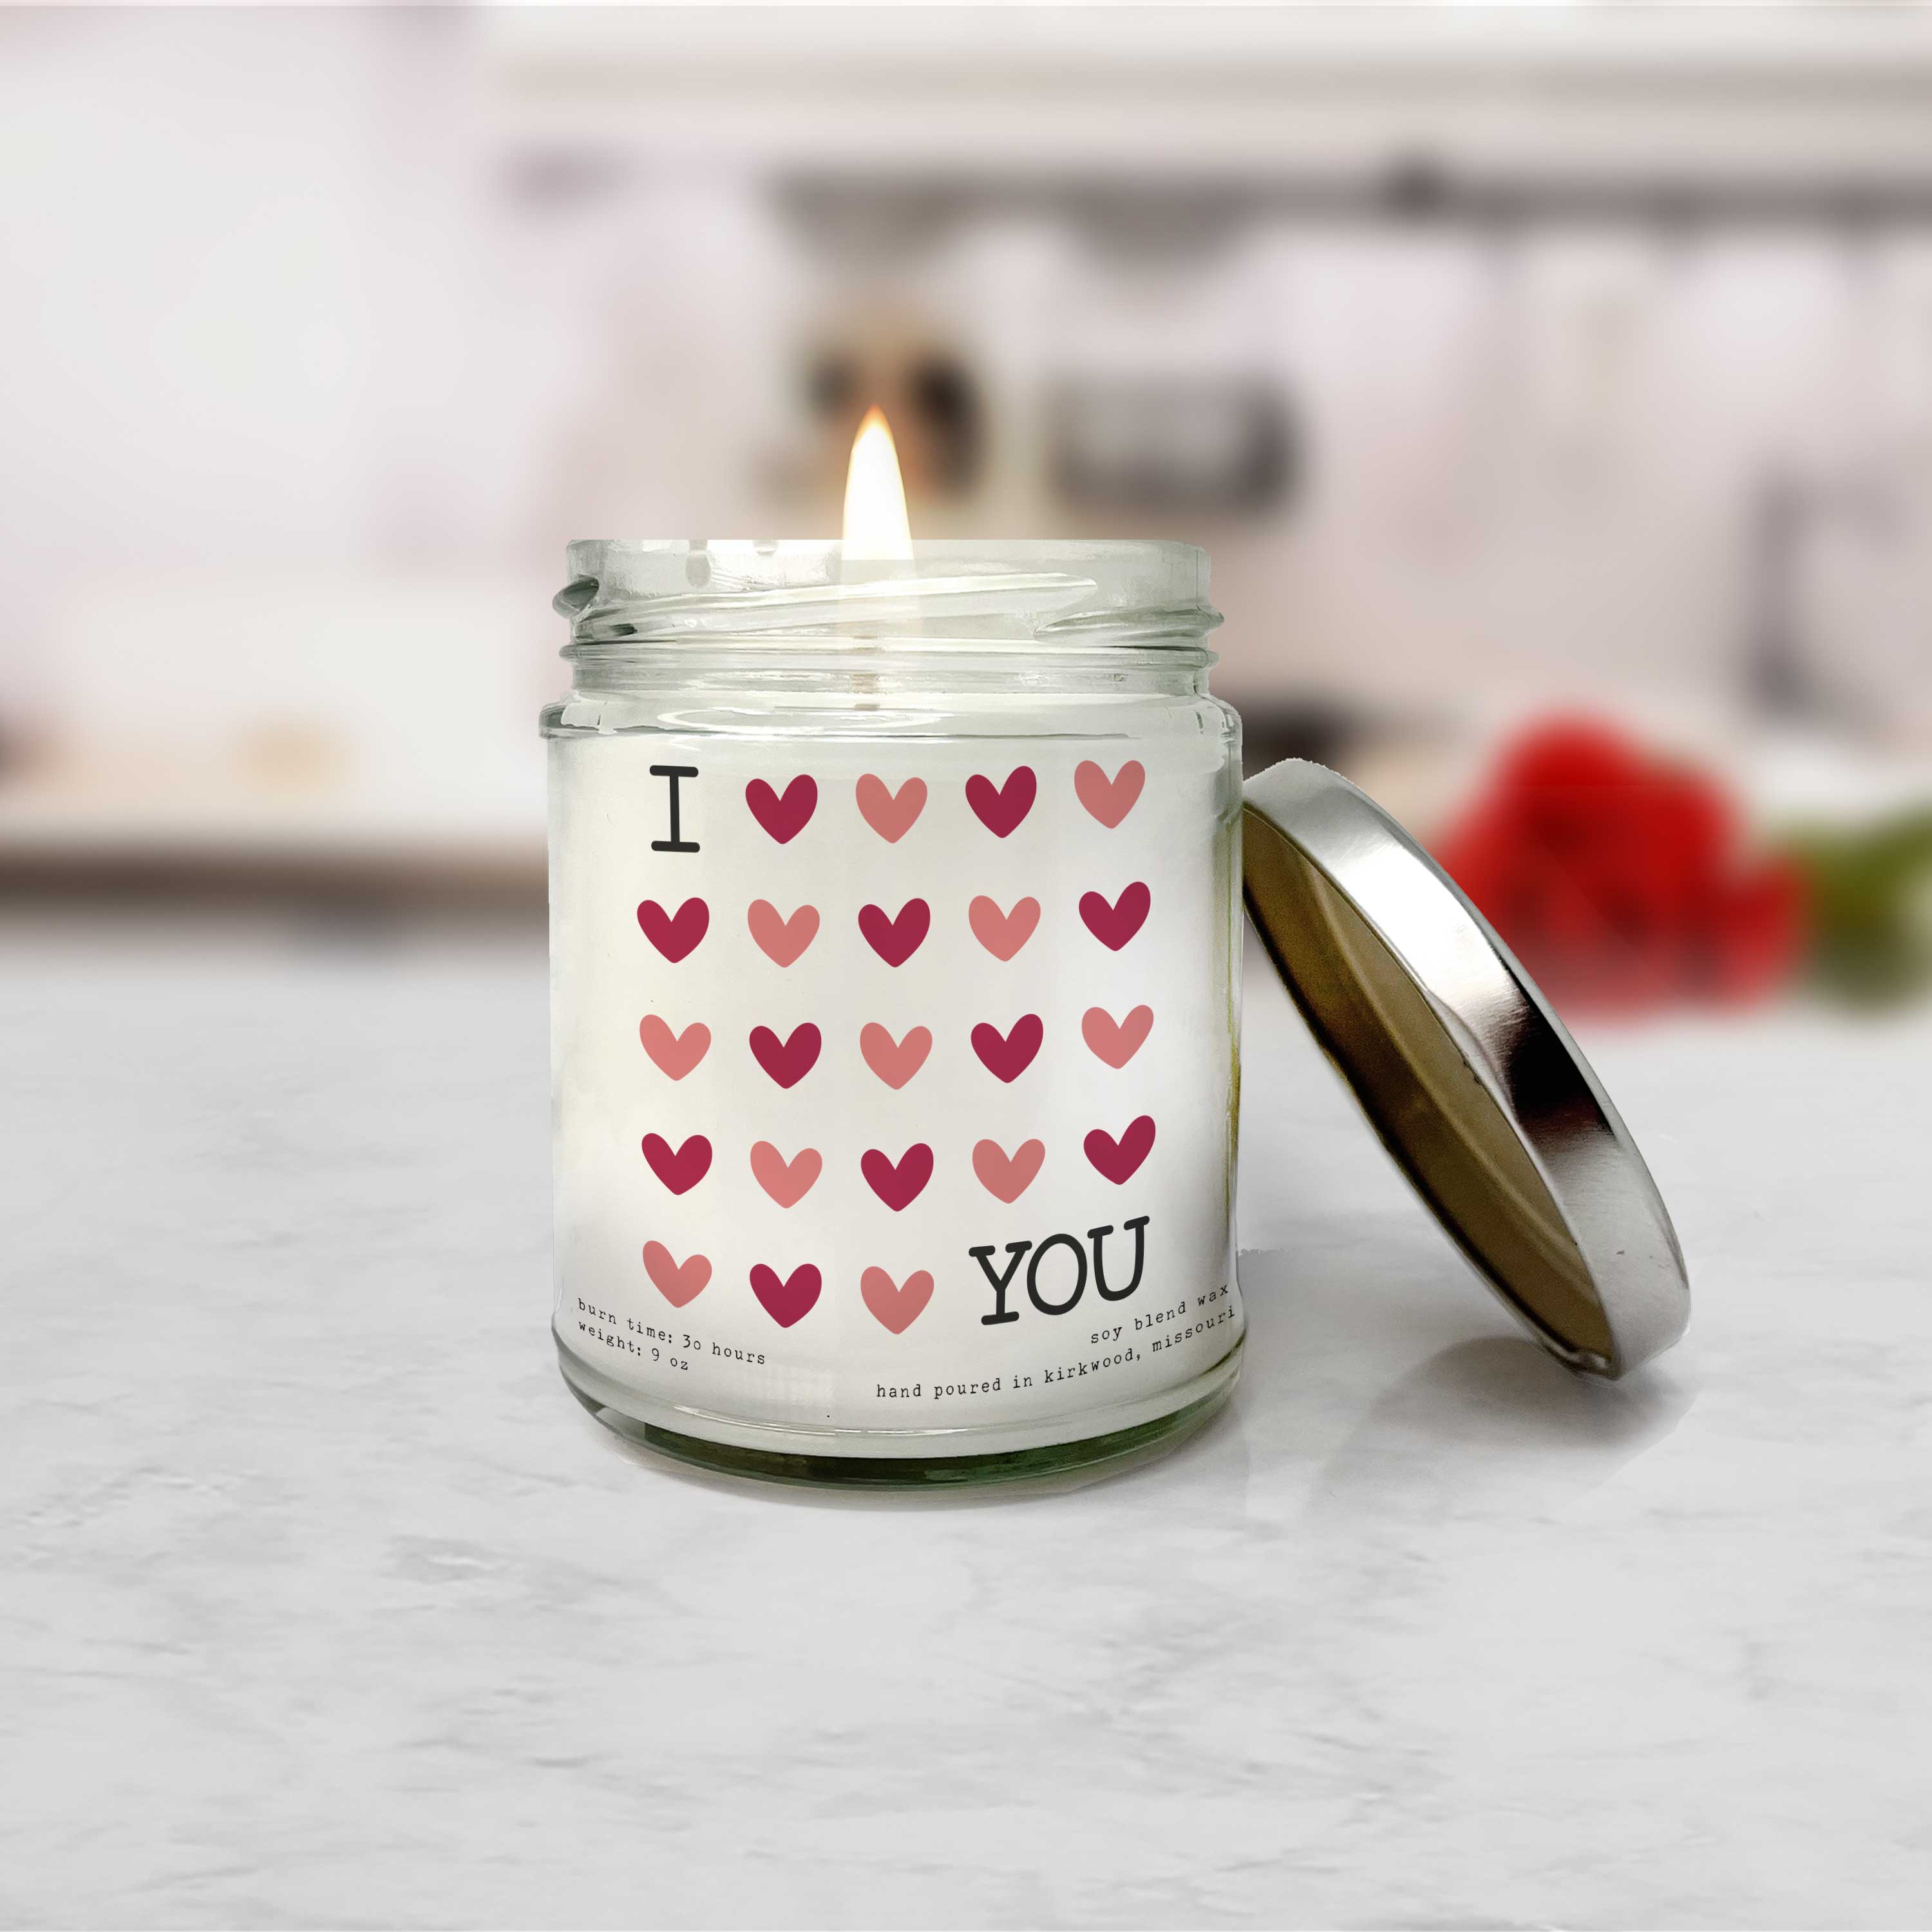 Diamond Heart Candles, Handmade Candles, Valentine's Day